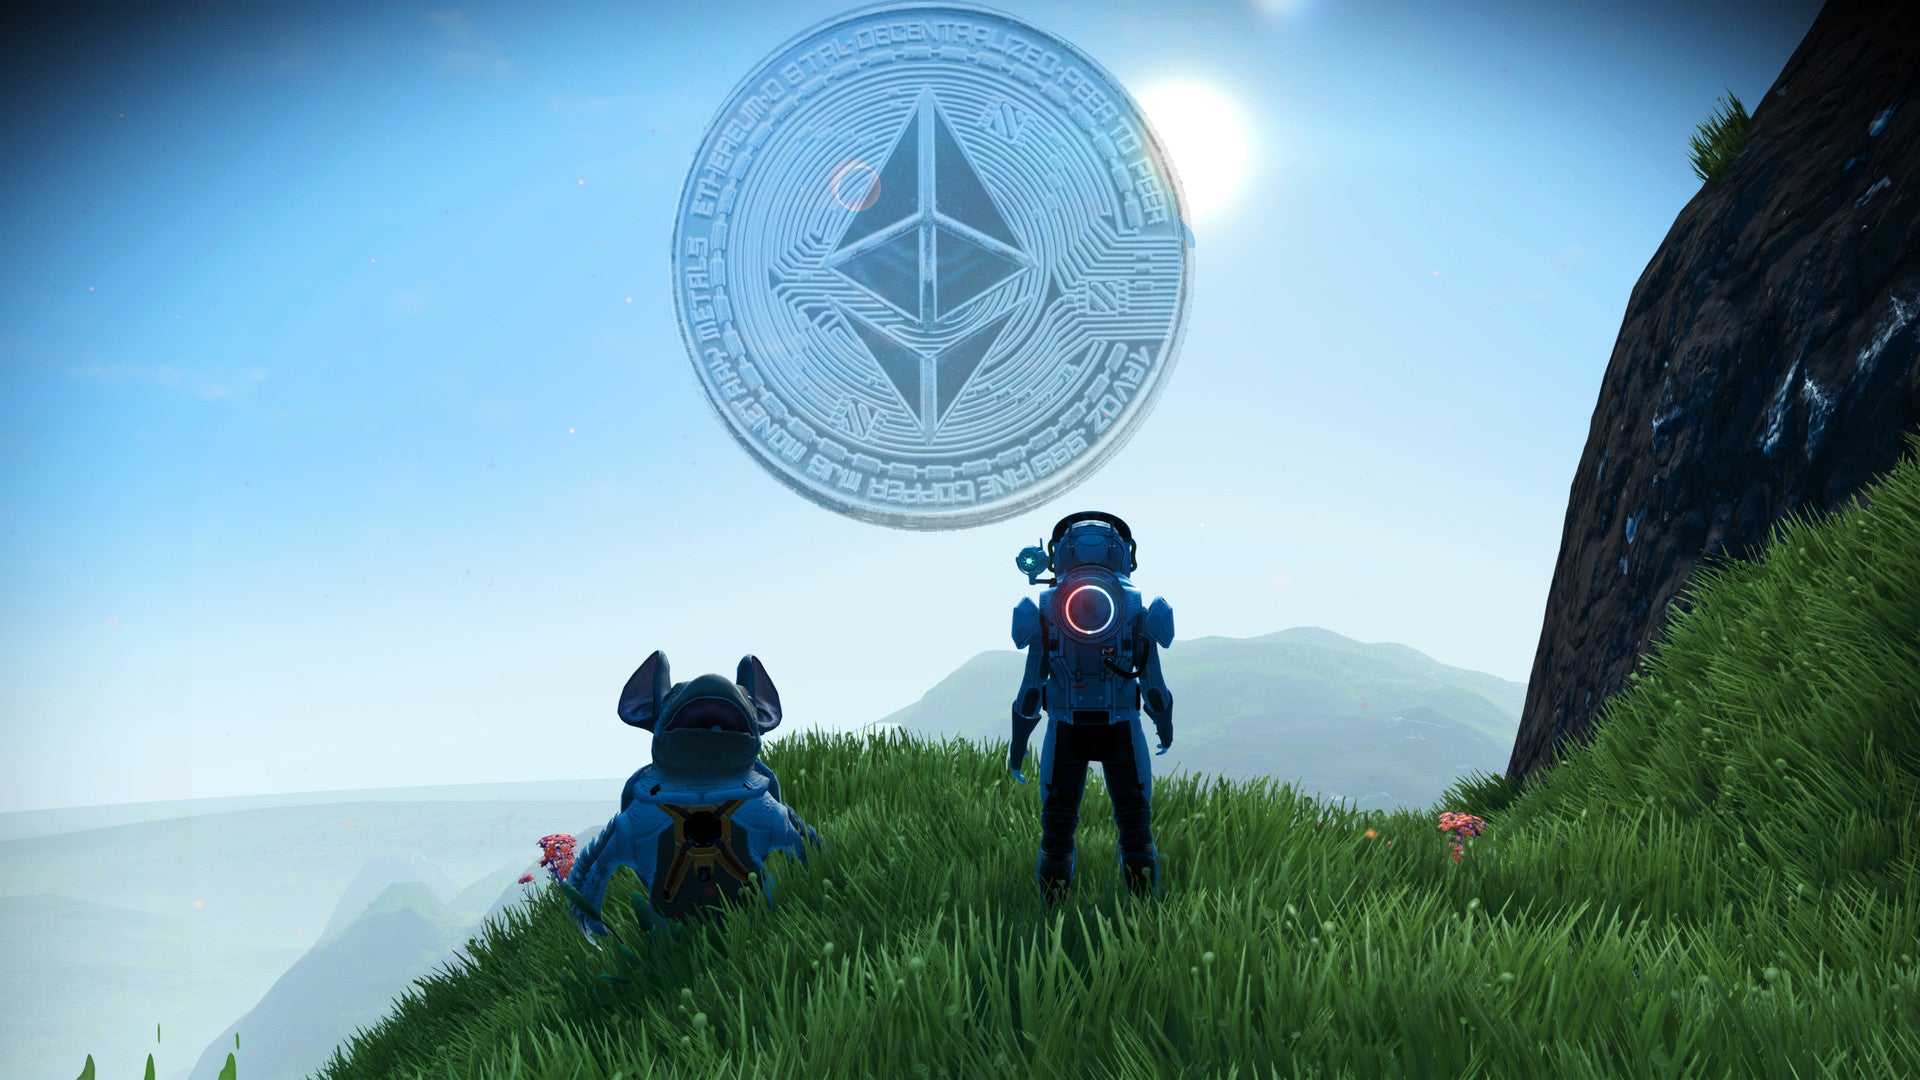 No Man's Sky players have created an in-game cryptocurrency that works because it has no value - Rock Paper Shotgun